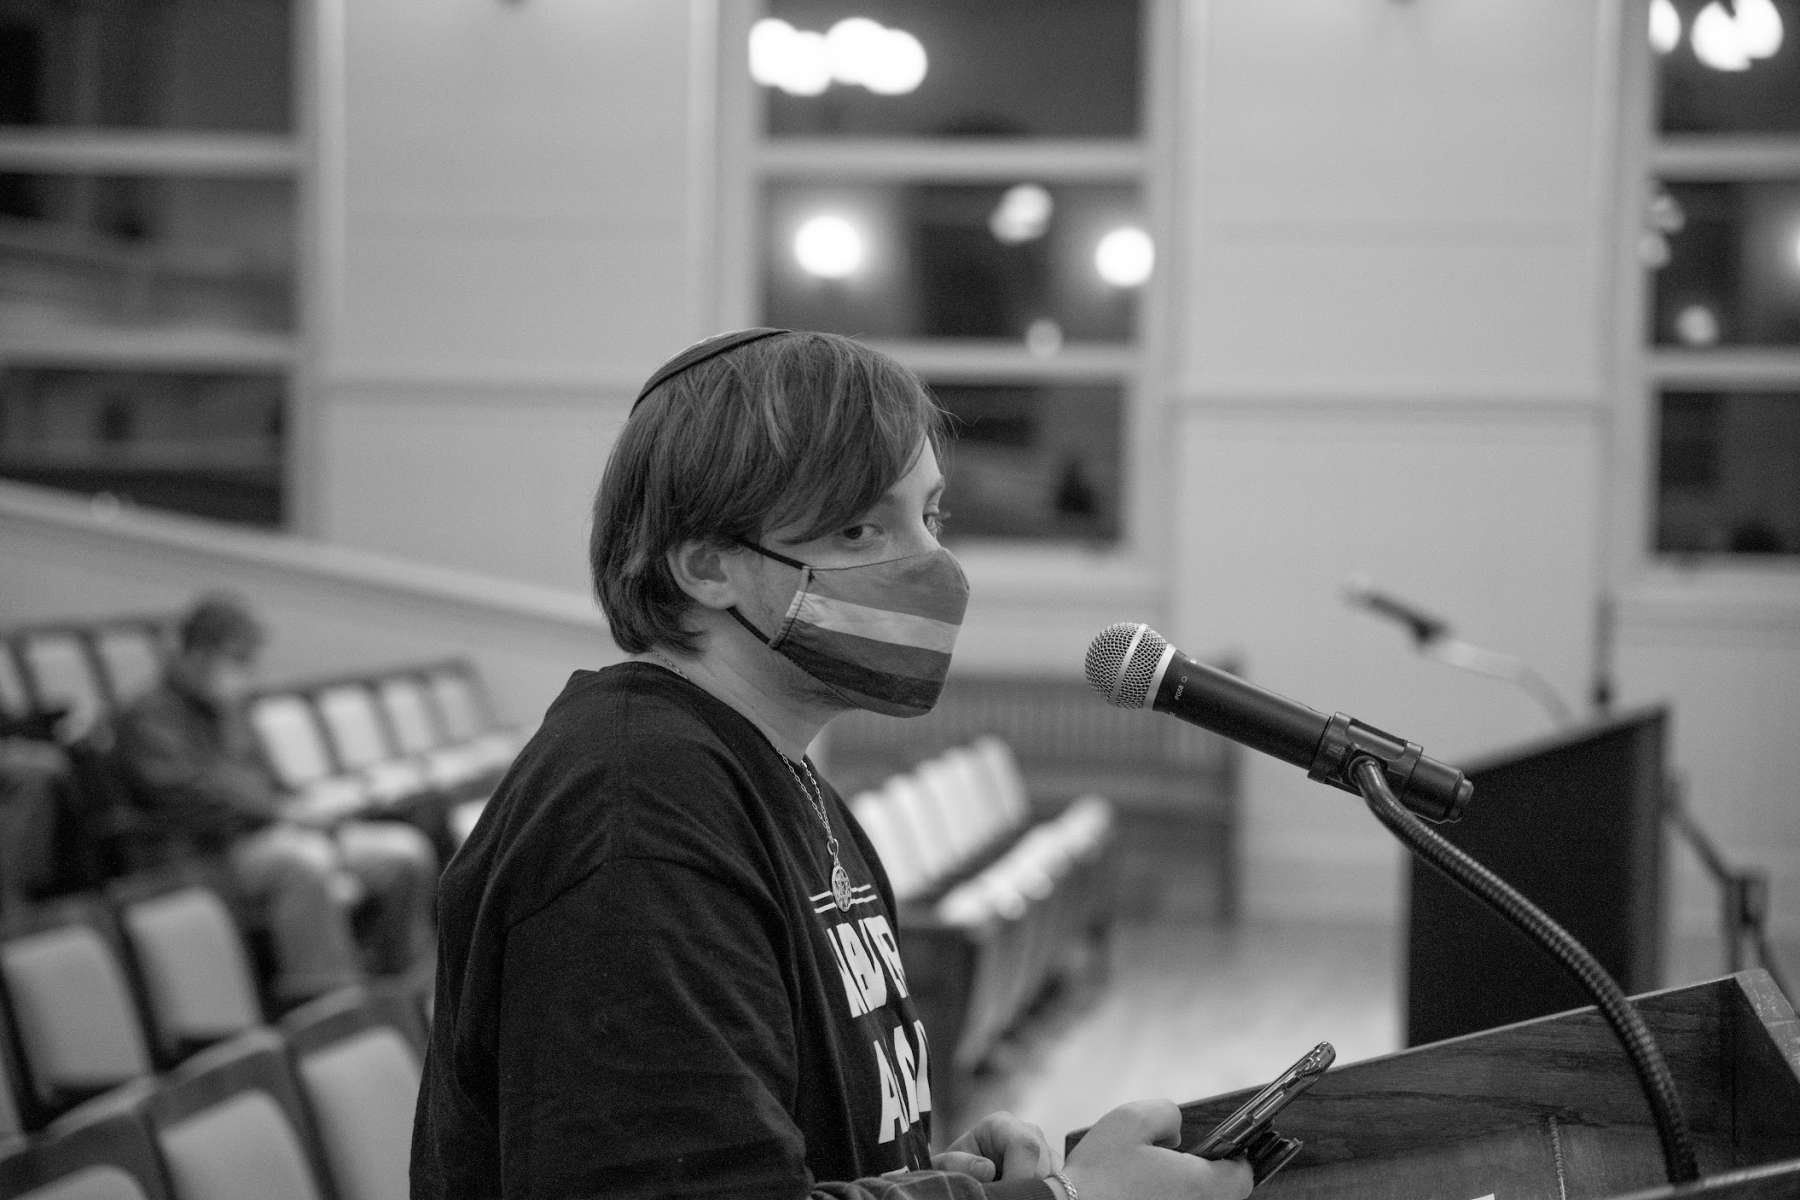 Never Again Action speaks out against ICE at Warwick Council meeting